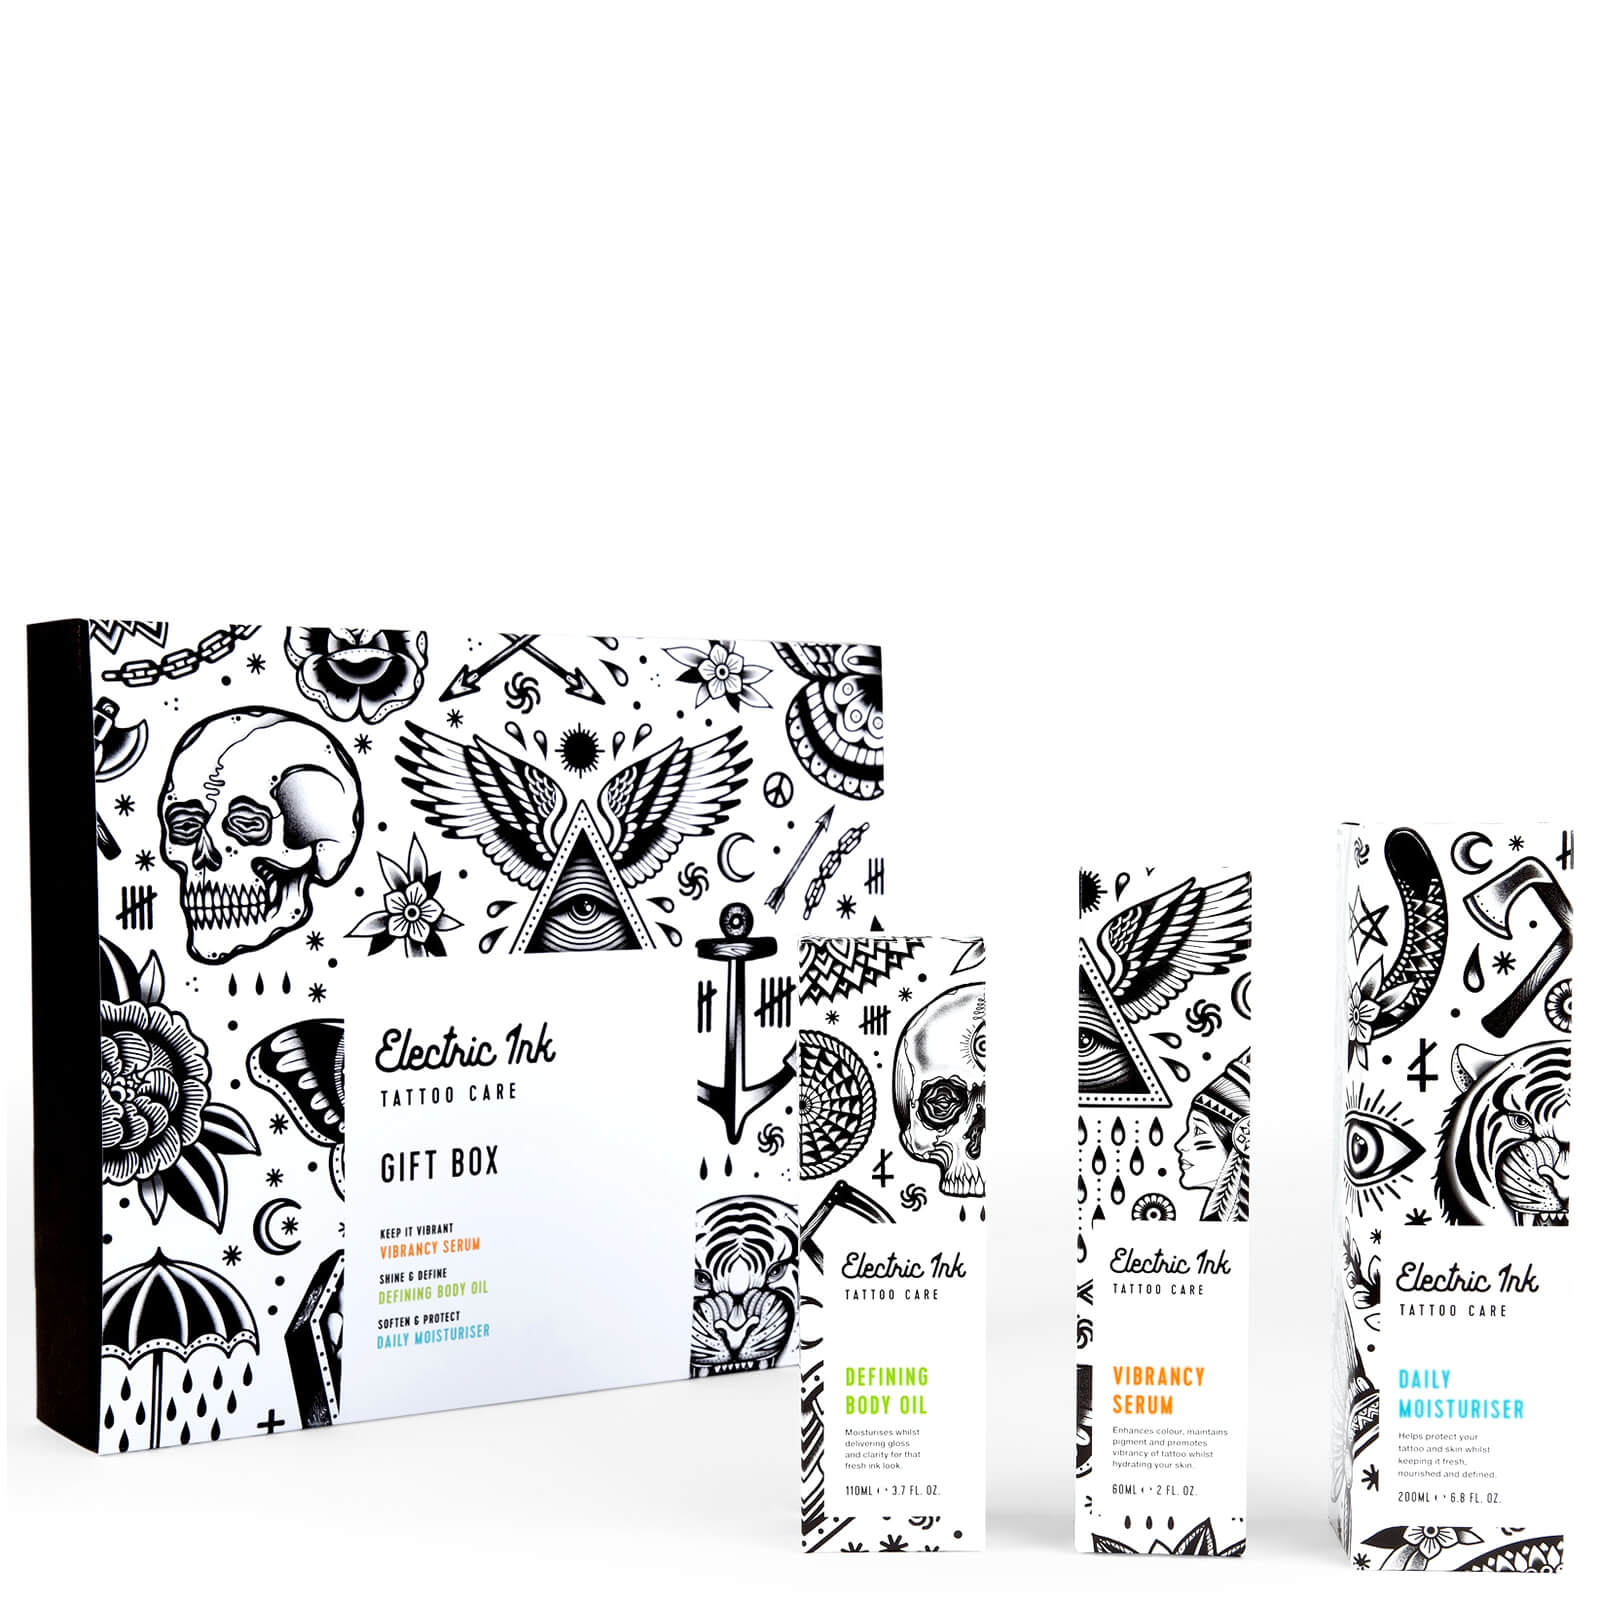 Electric Ink Tattoo Care Gift Set